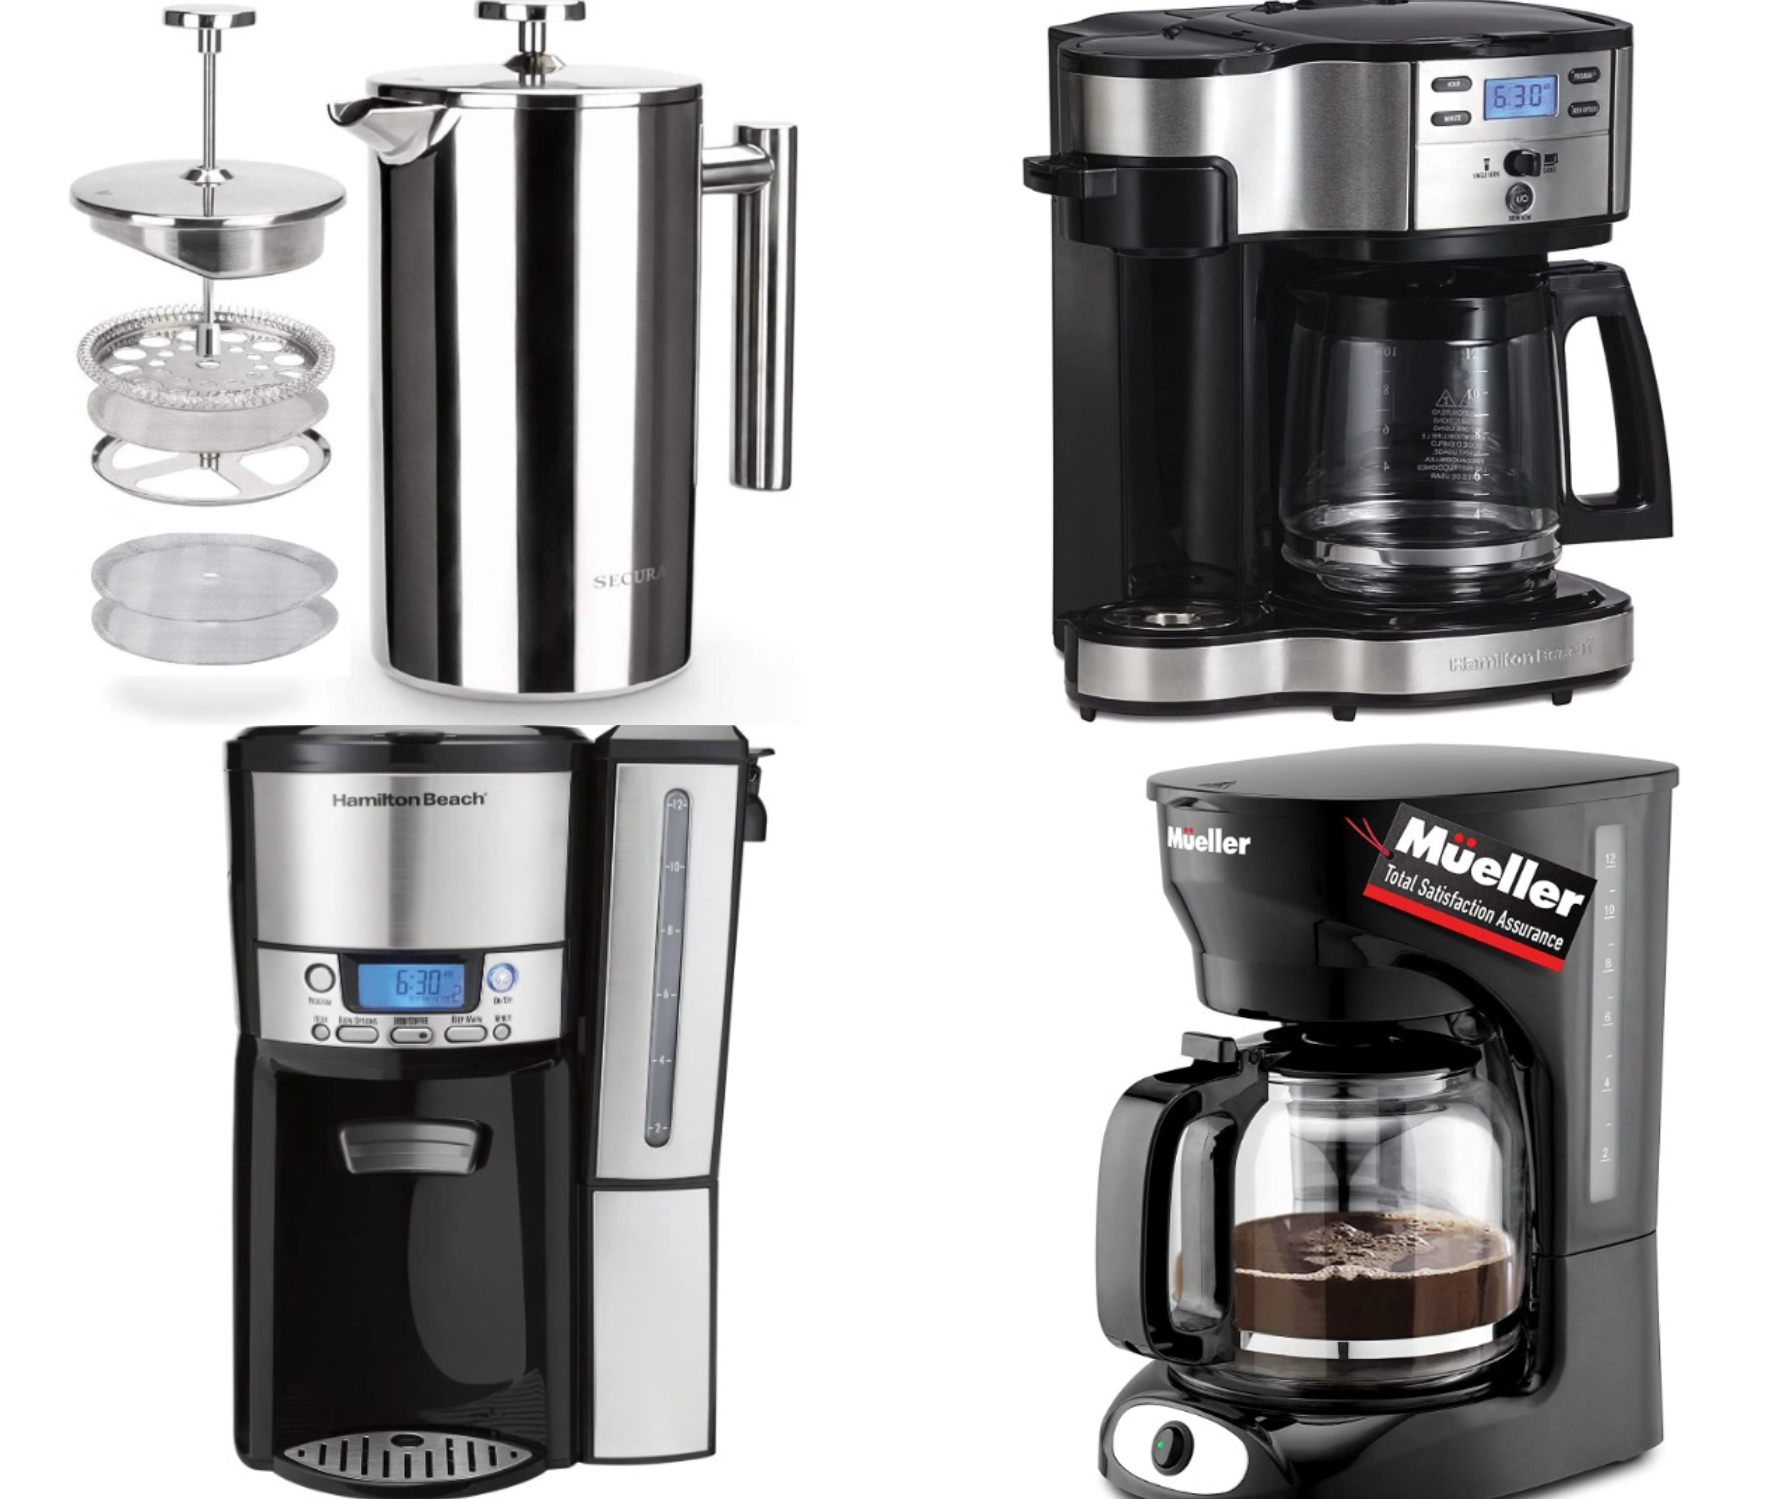 Prime Day 2022: The 8 best deals on coffee makers, Keurig, Krups,  Philips 